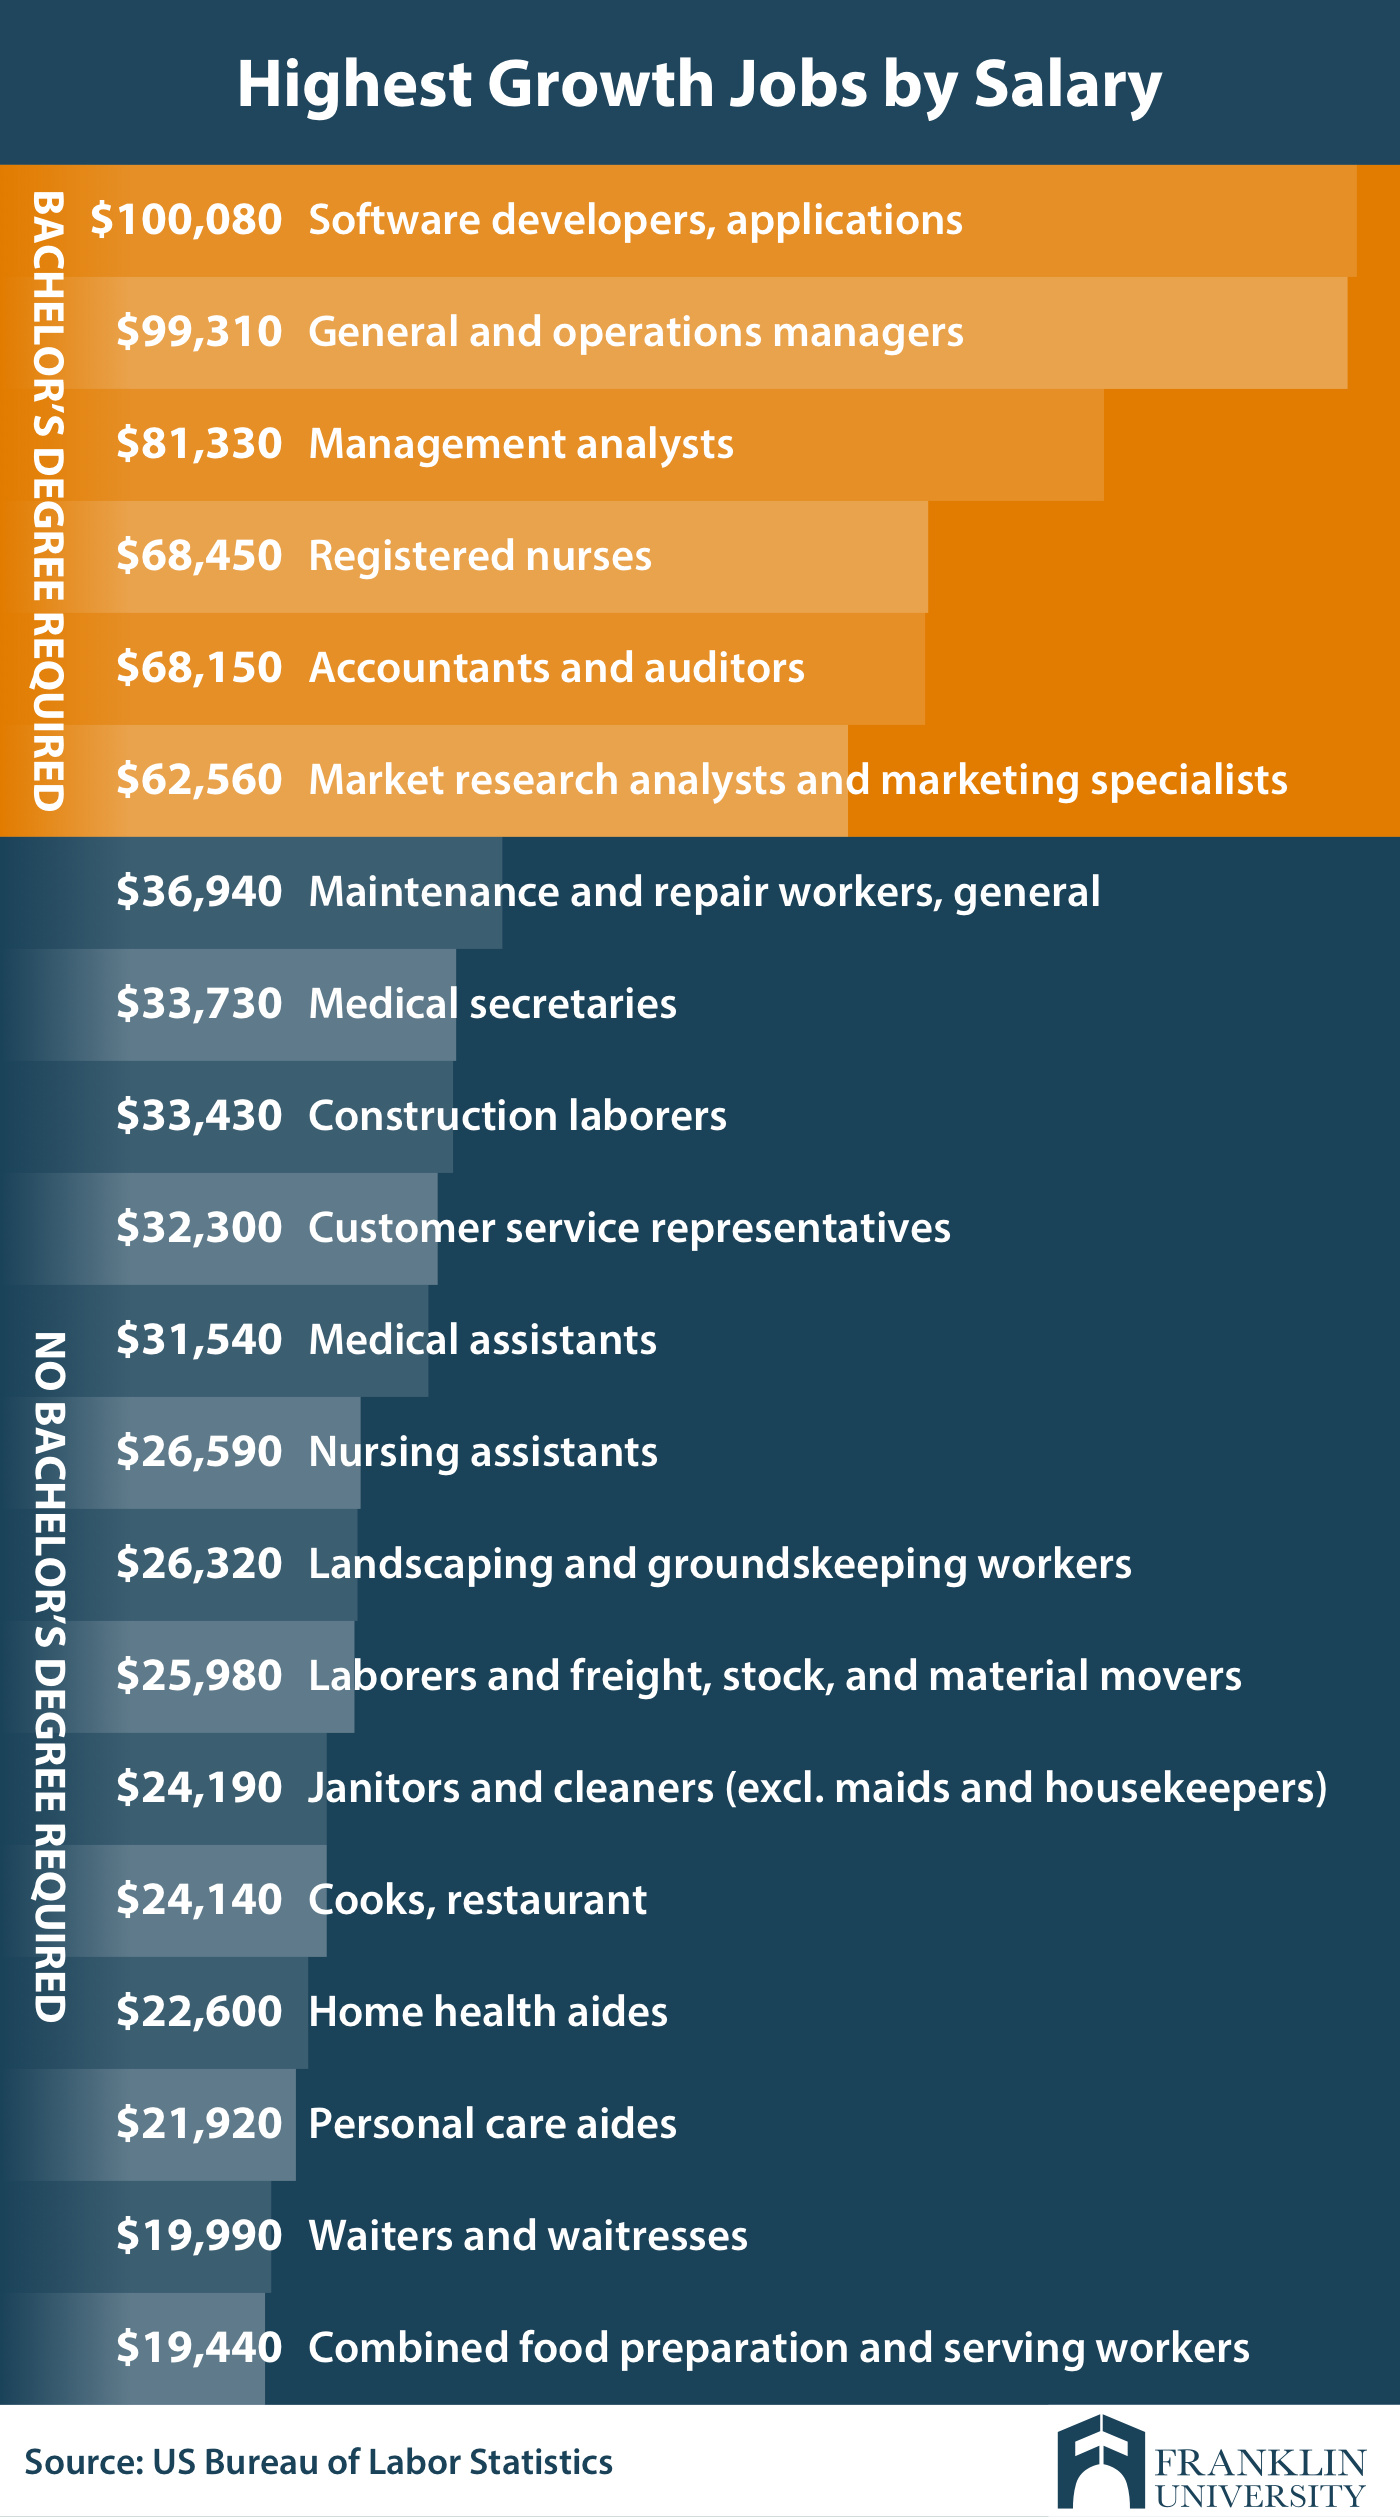 graphic describes the highest growth jobs by salary